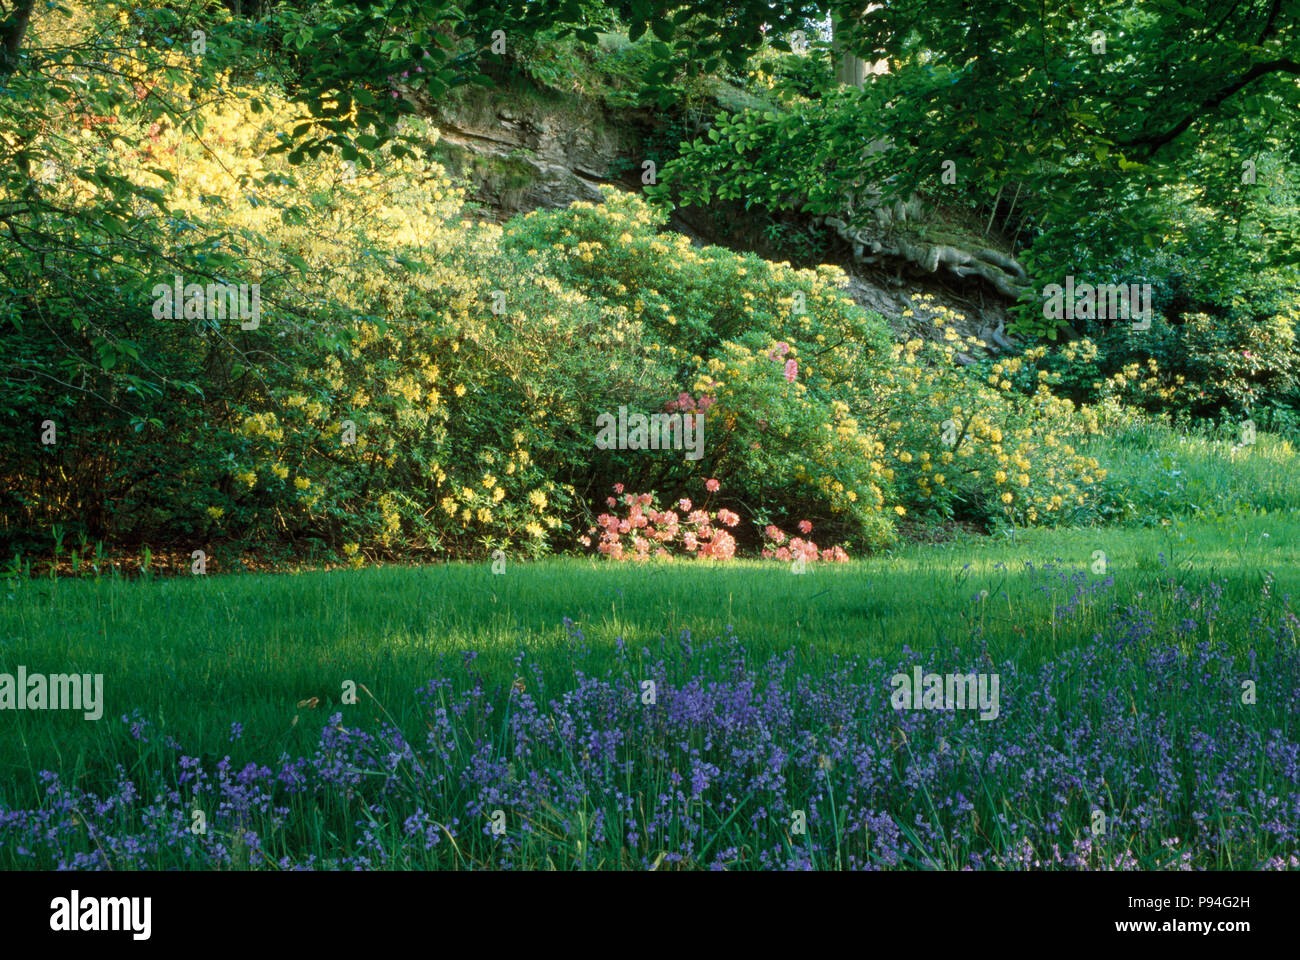 Bluebells in large wild country garden Stock Photo